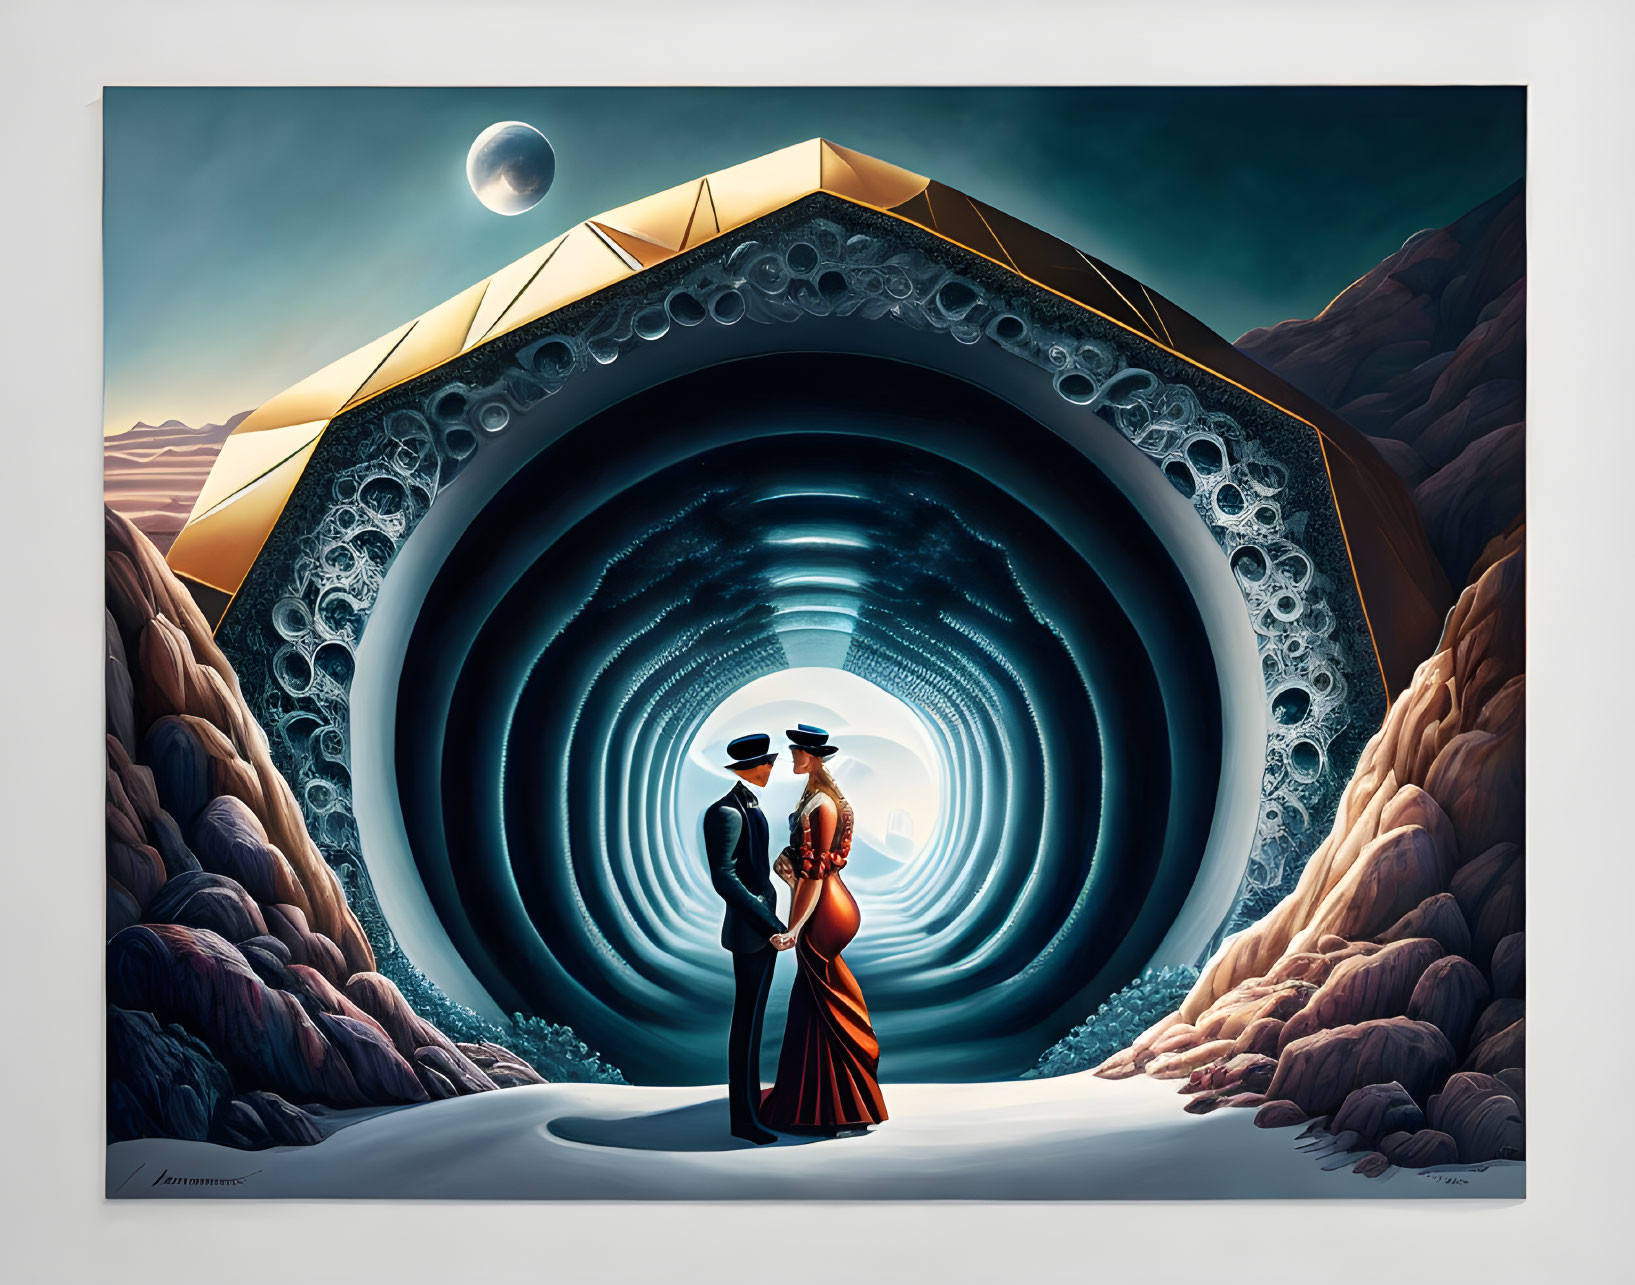 Couple standing under futuristic archway in surreal moonlit landscape